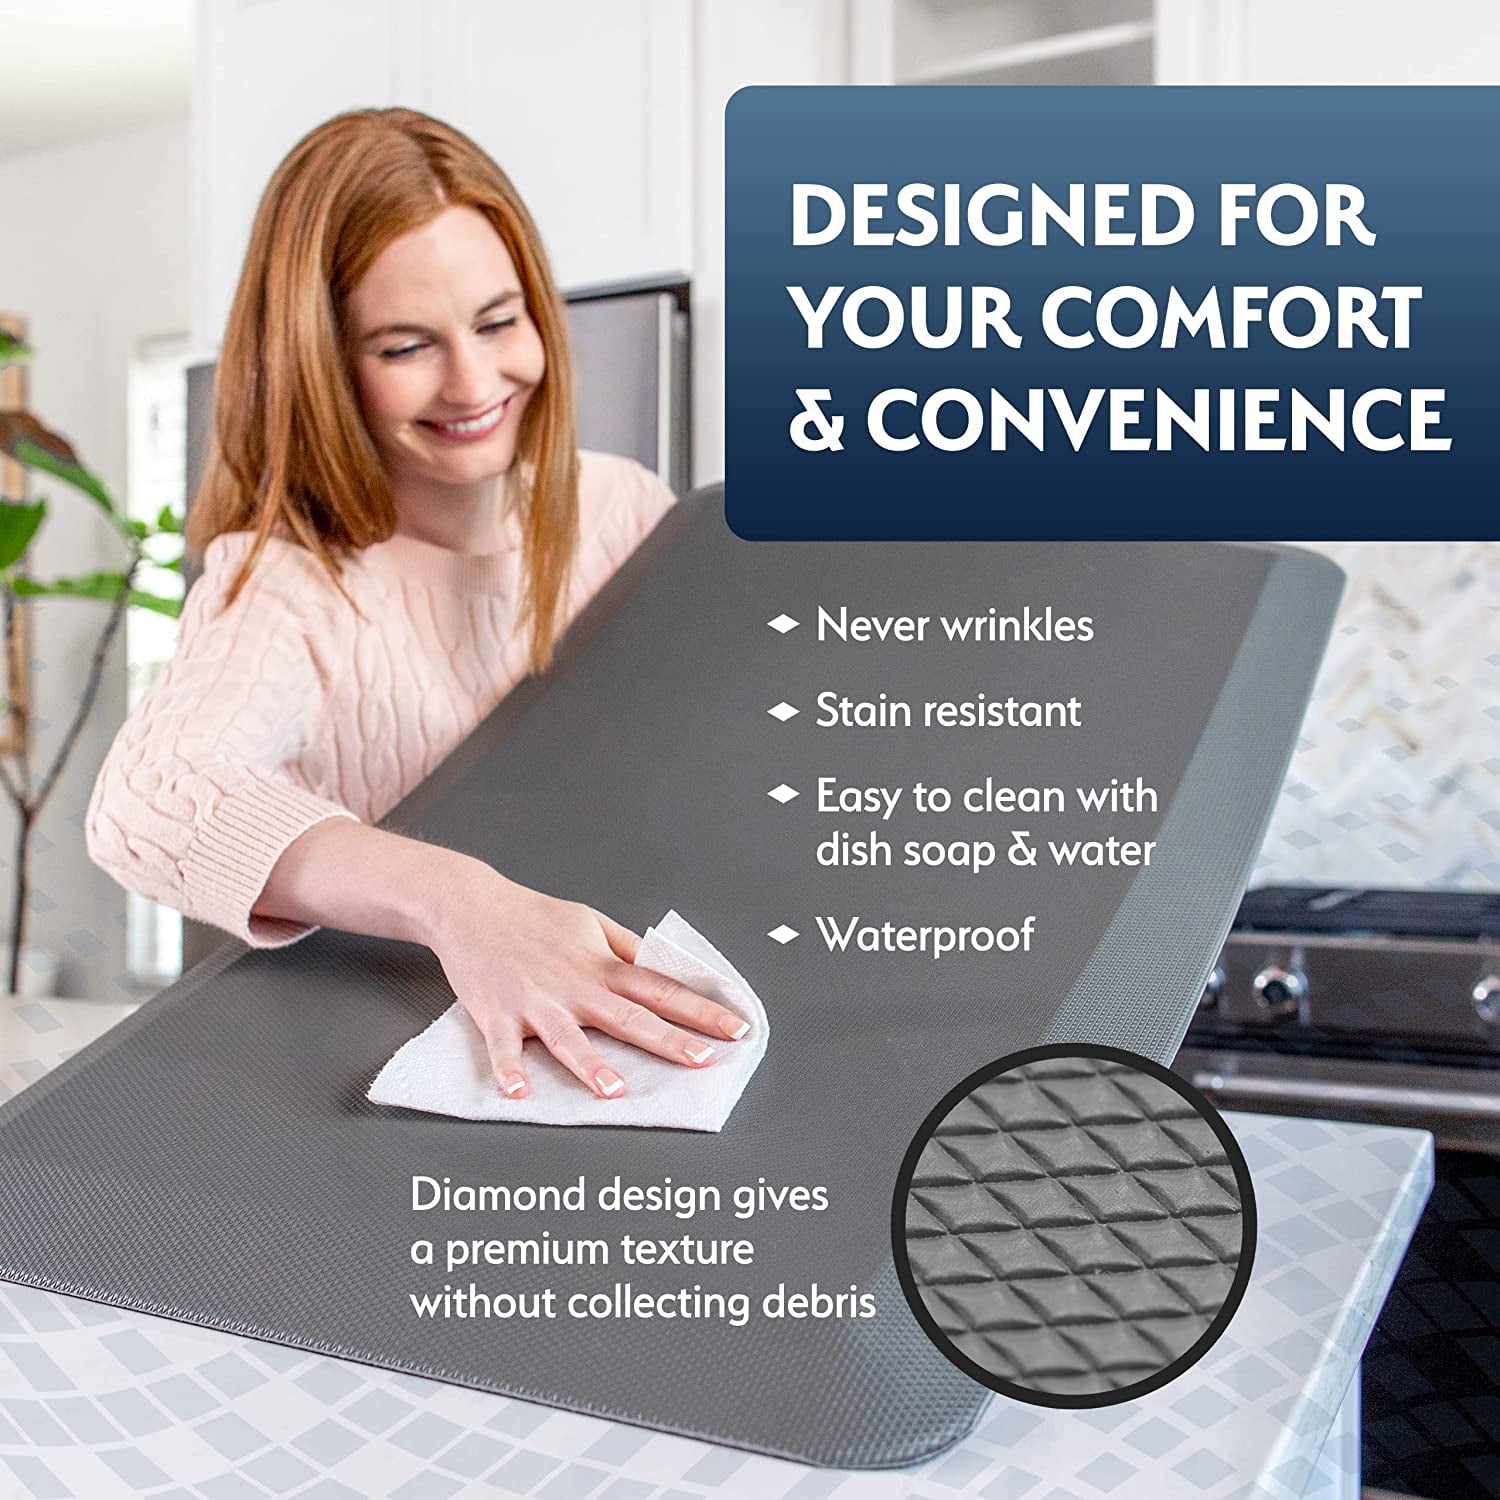 Anti Fatigue Comfort Floor Mat By Sky Mats - Commercial Grade Quality –  Pete's Home Decor & Furnishings